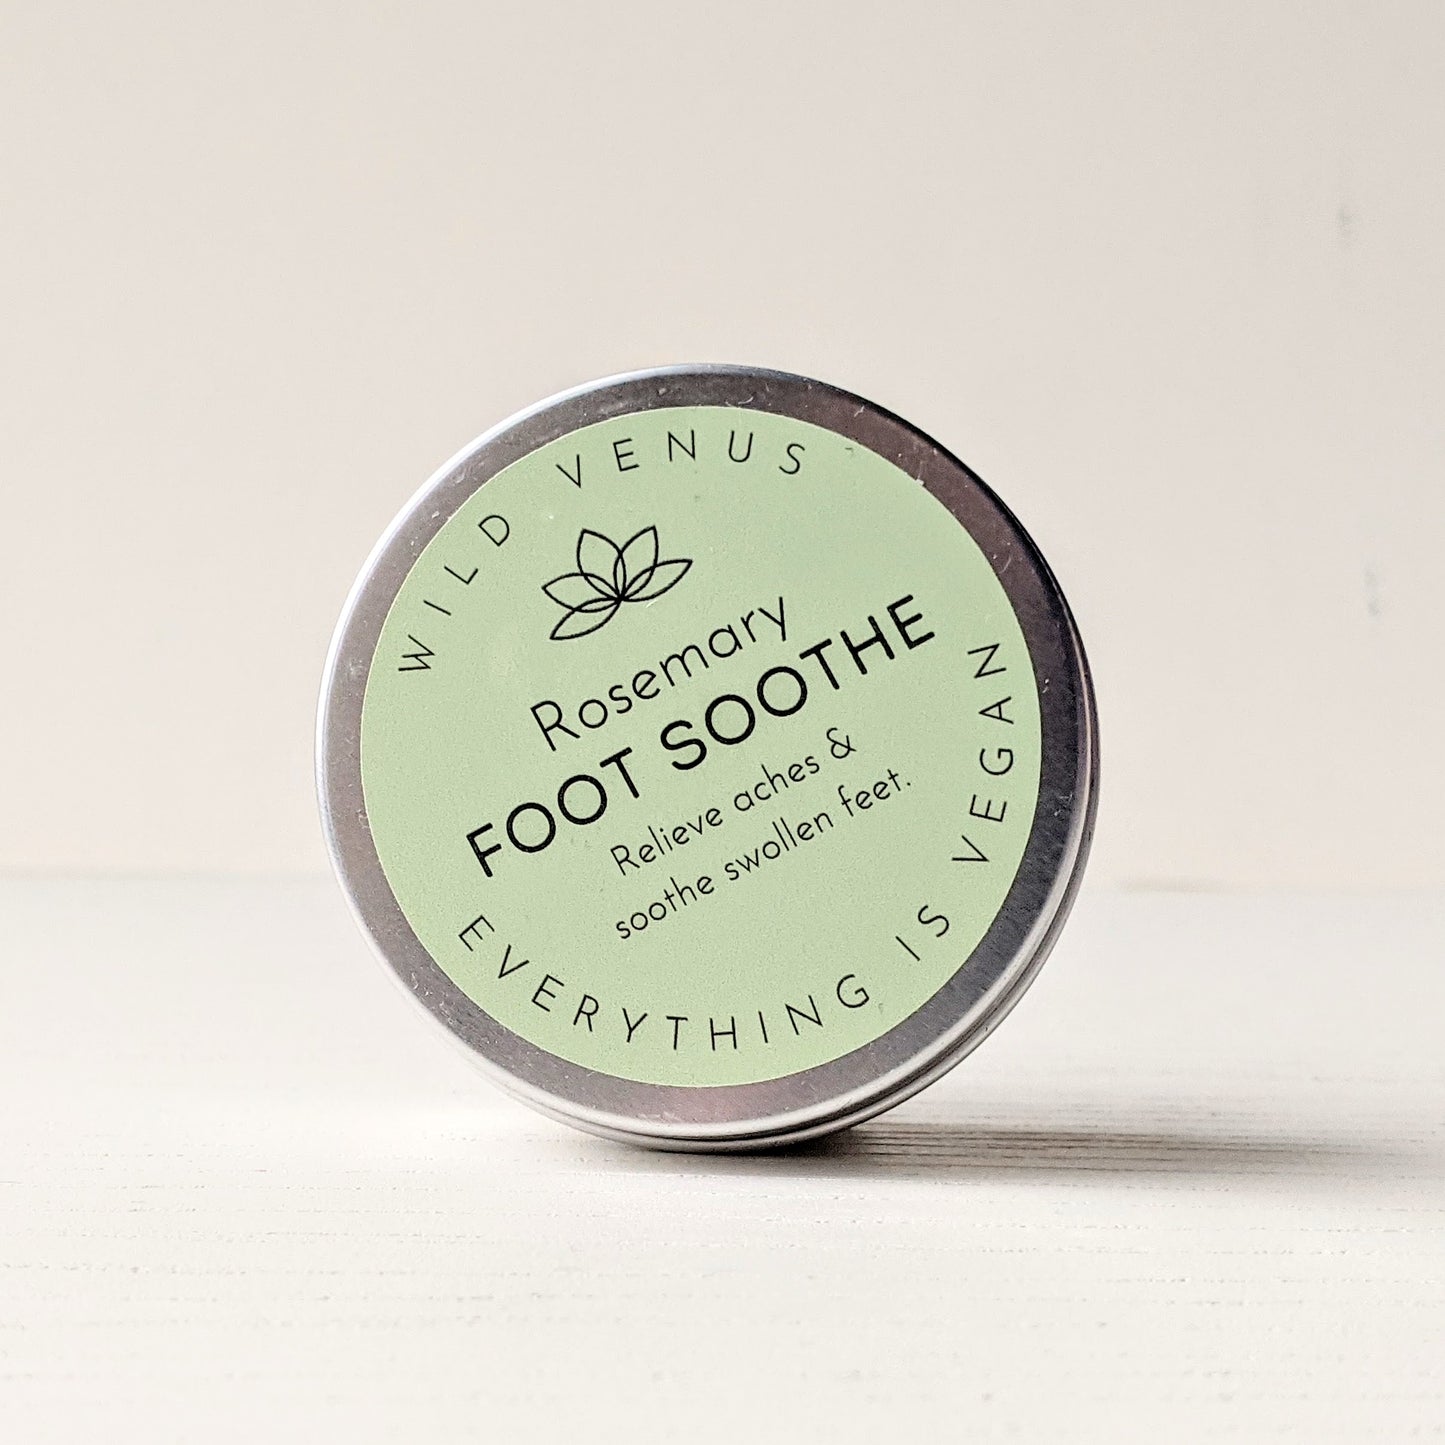 A small tin of the Rosemary Foot Soothe